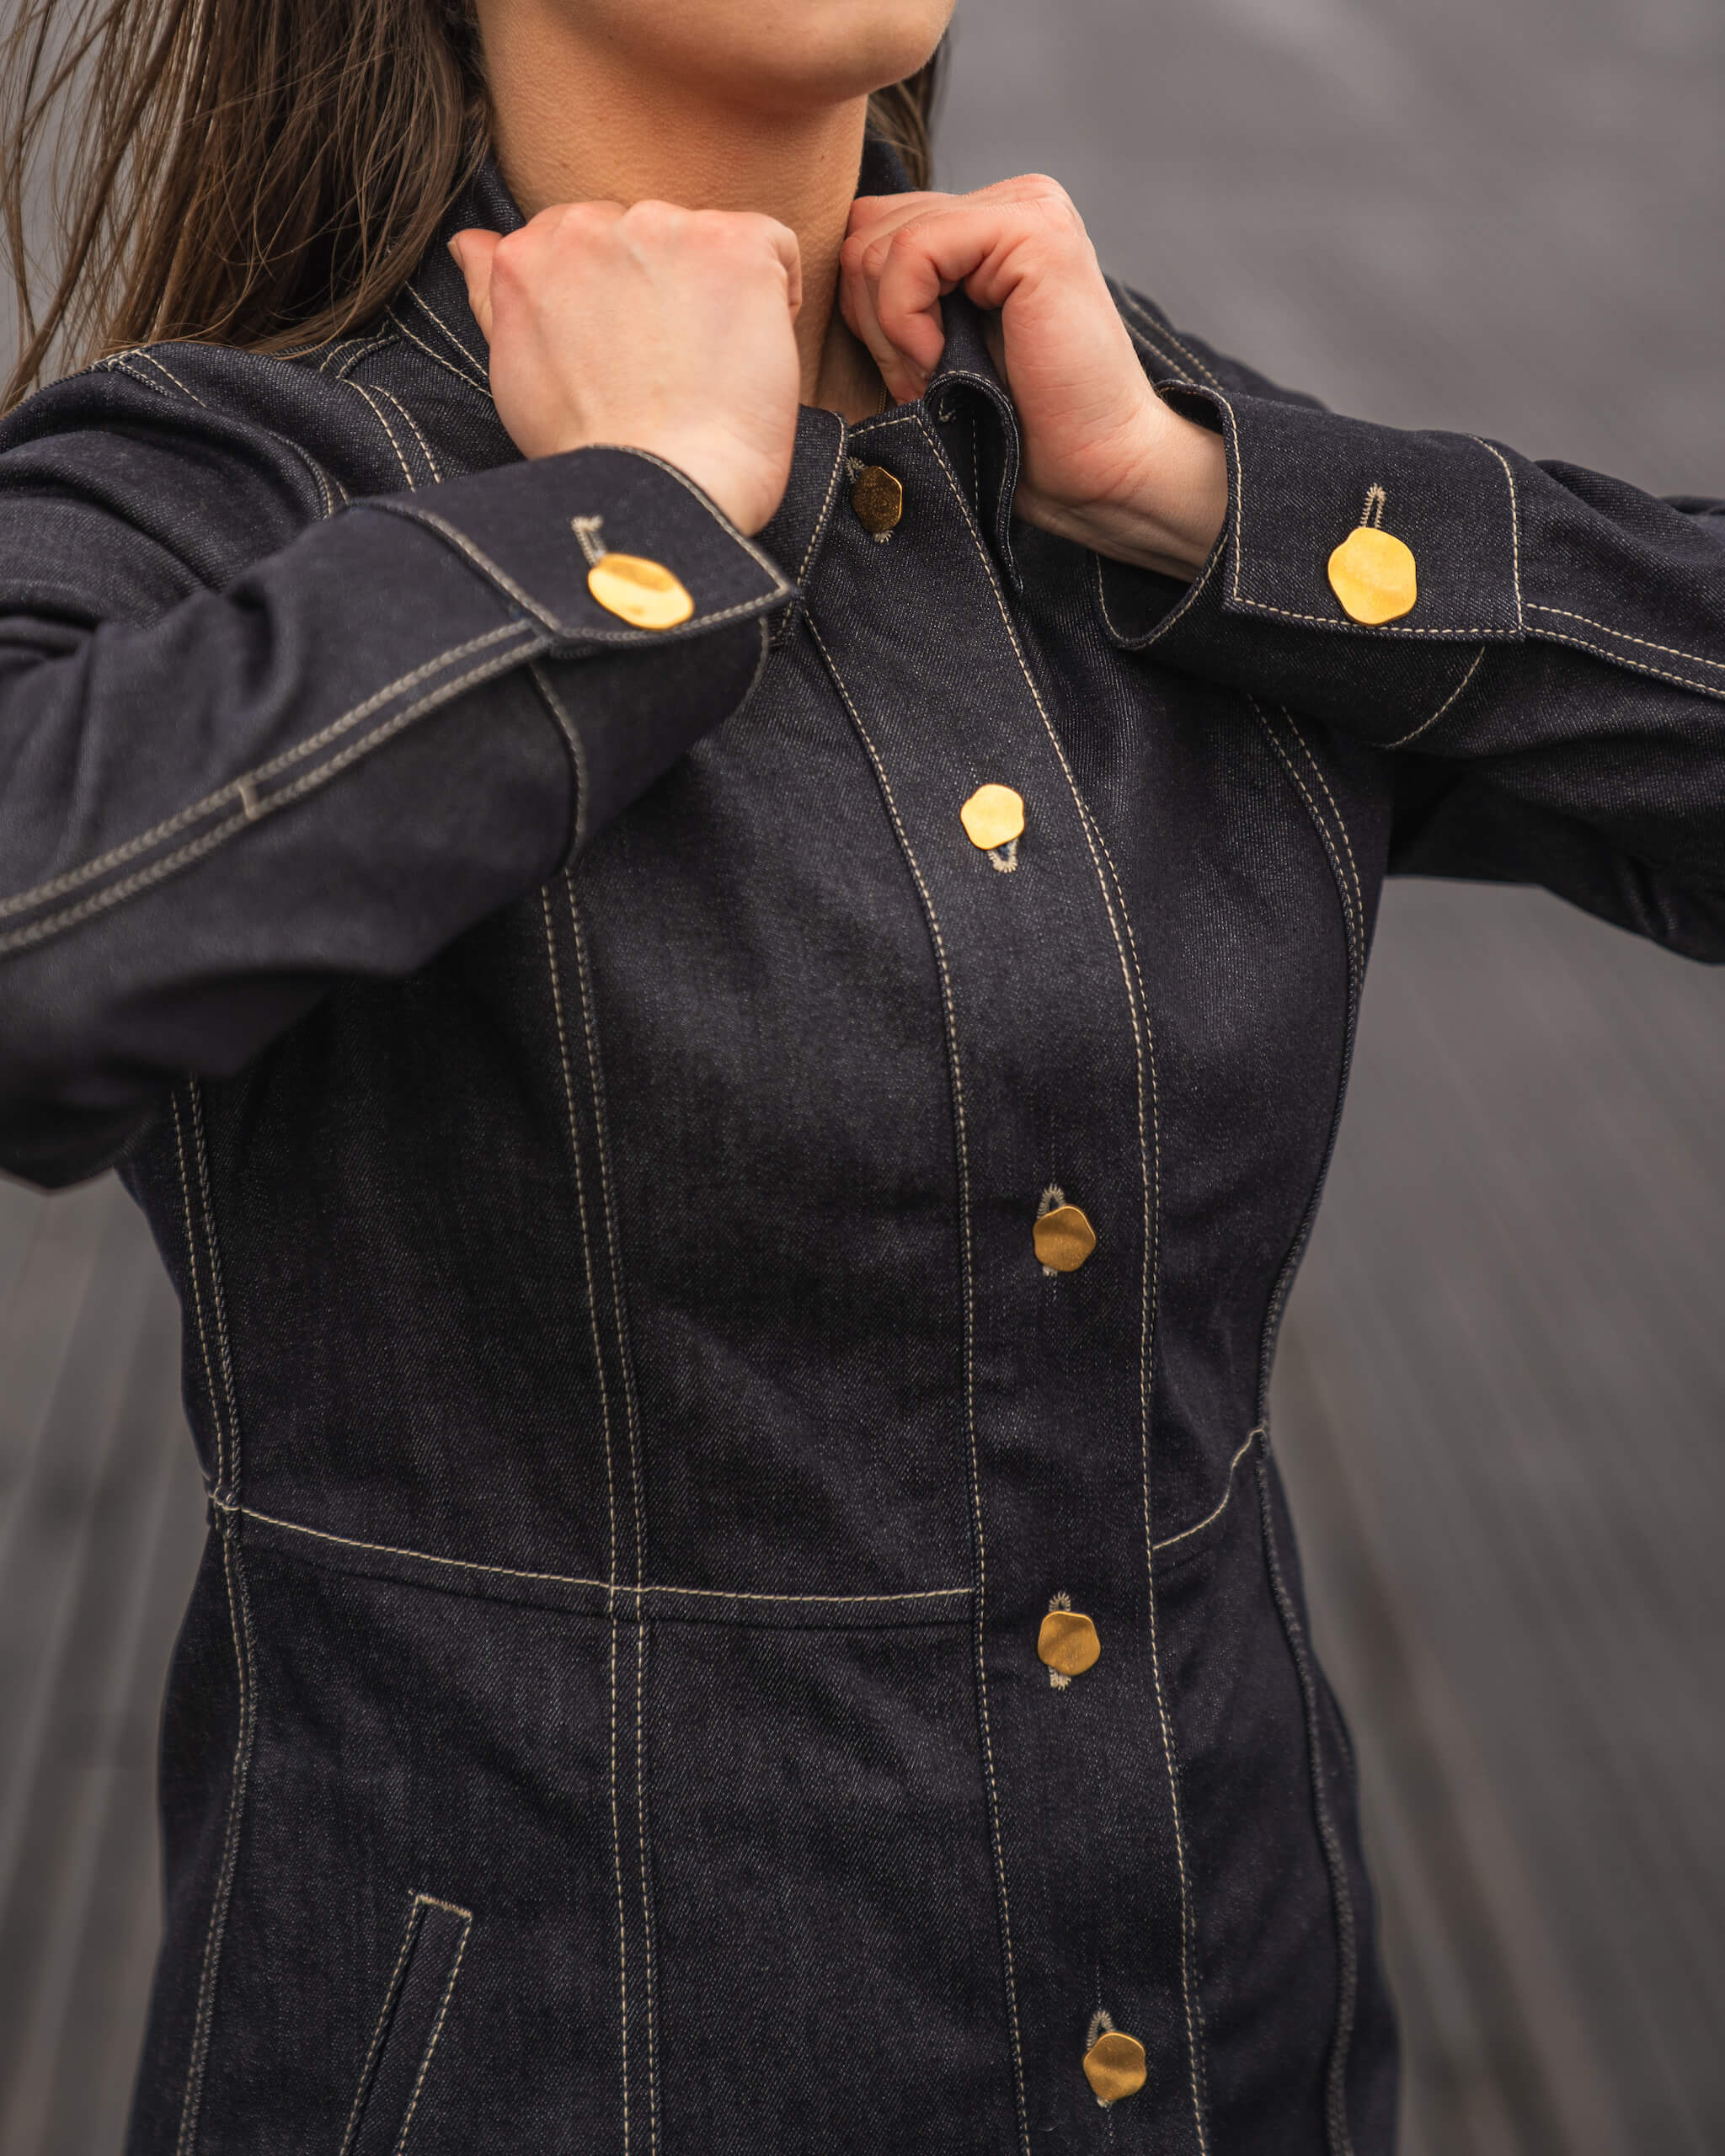 Close-up of a woman adjusting a Cyme Copenhagen dark denim jacket with distinctive gold button detailing, highlighting the brand's commitment to durable materials and timeless design in women's clothing.